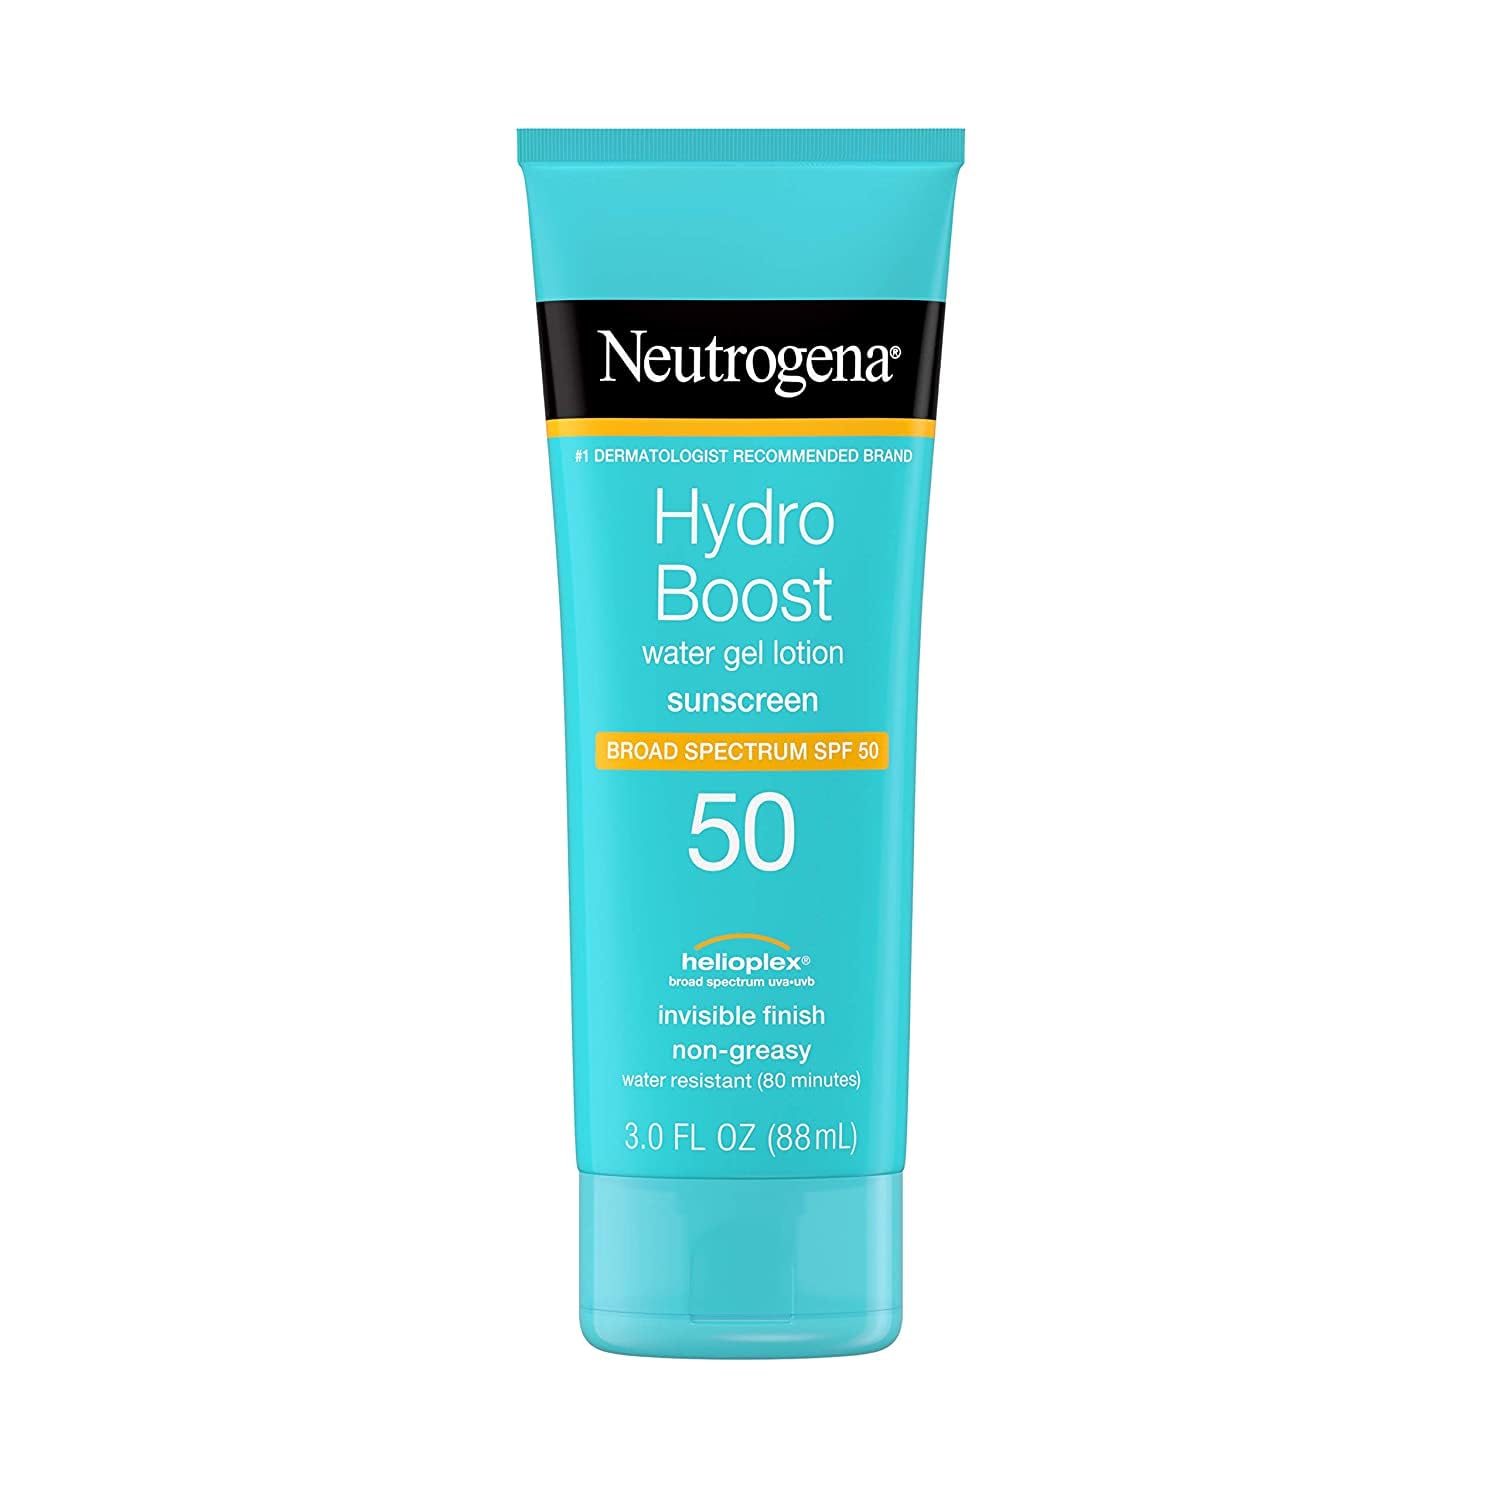 Neutrogena Hydro Boost Moisturizing Water Gel Sunscreen Lotion with Broad Spectrum SPF 50, Water-Resistant & Non-Greasy Hydrating Sunscreen Lotion, Oil-Free, 3 fl. oz : Beauty & Personal Care